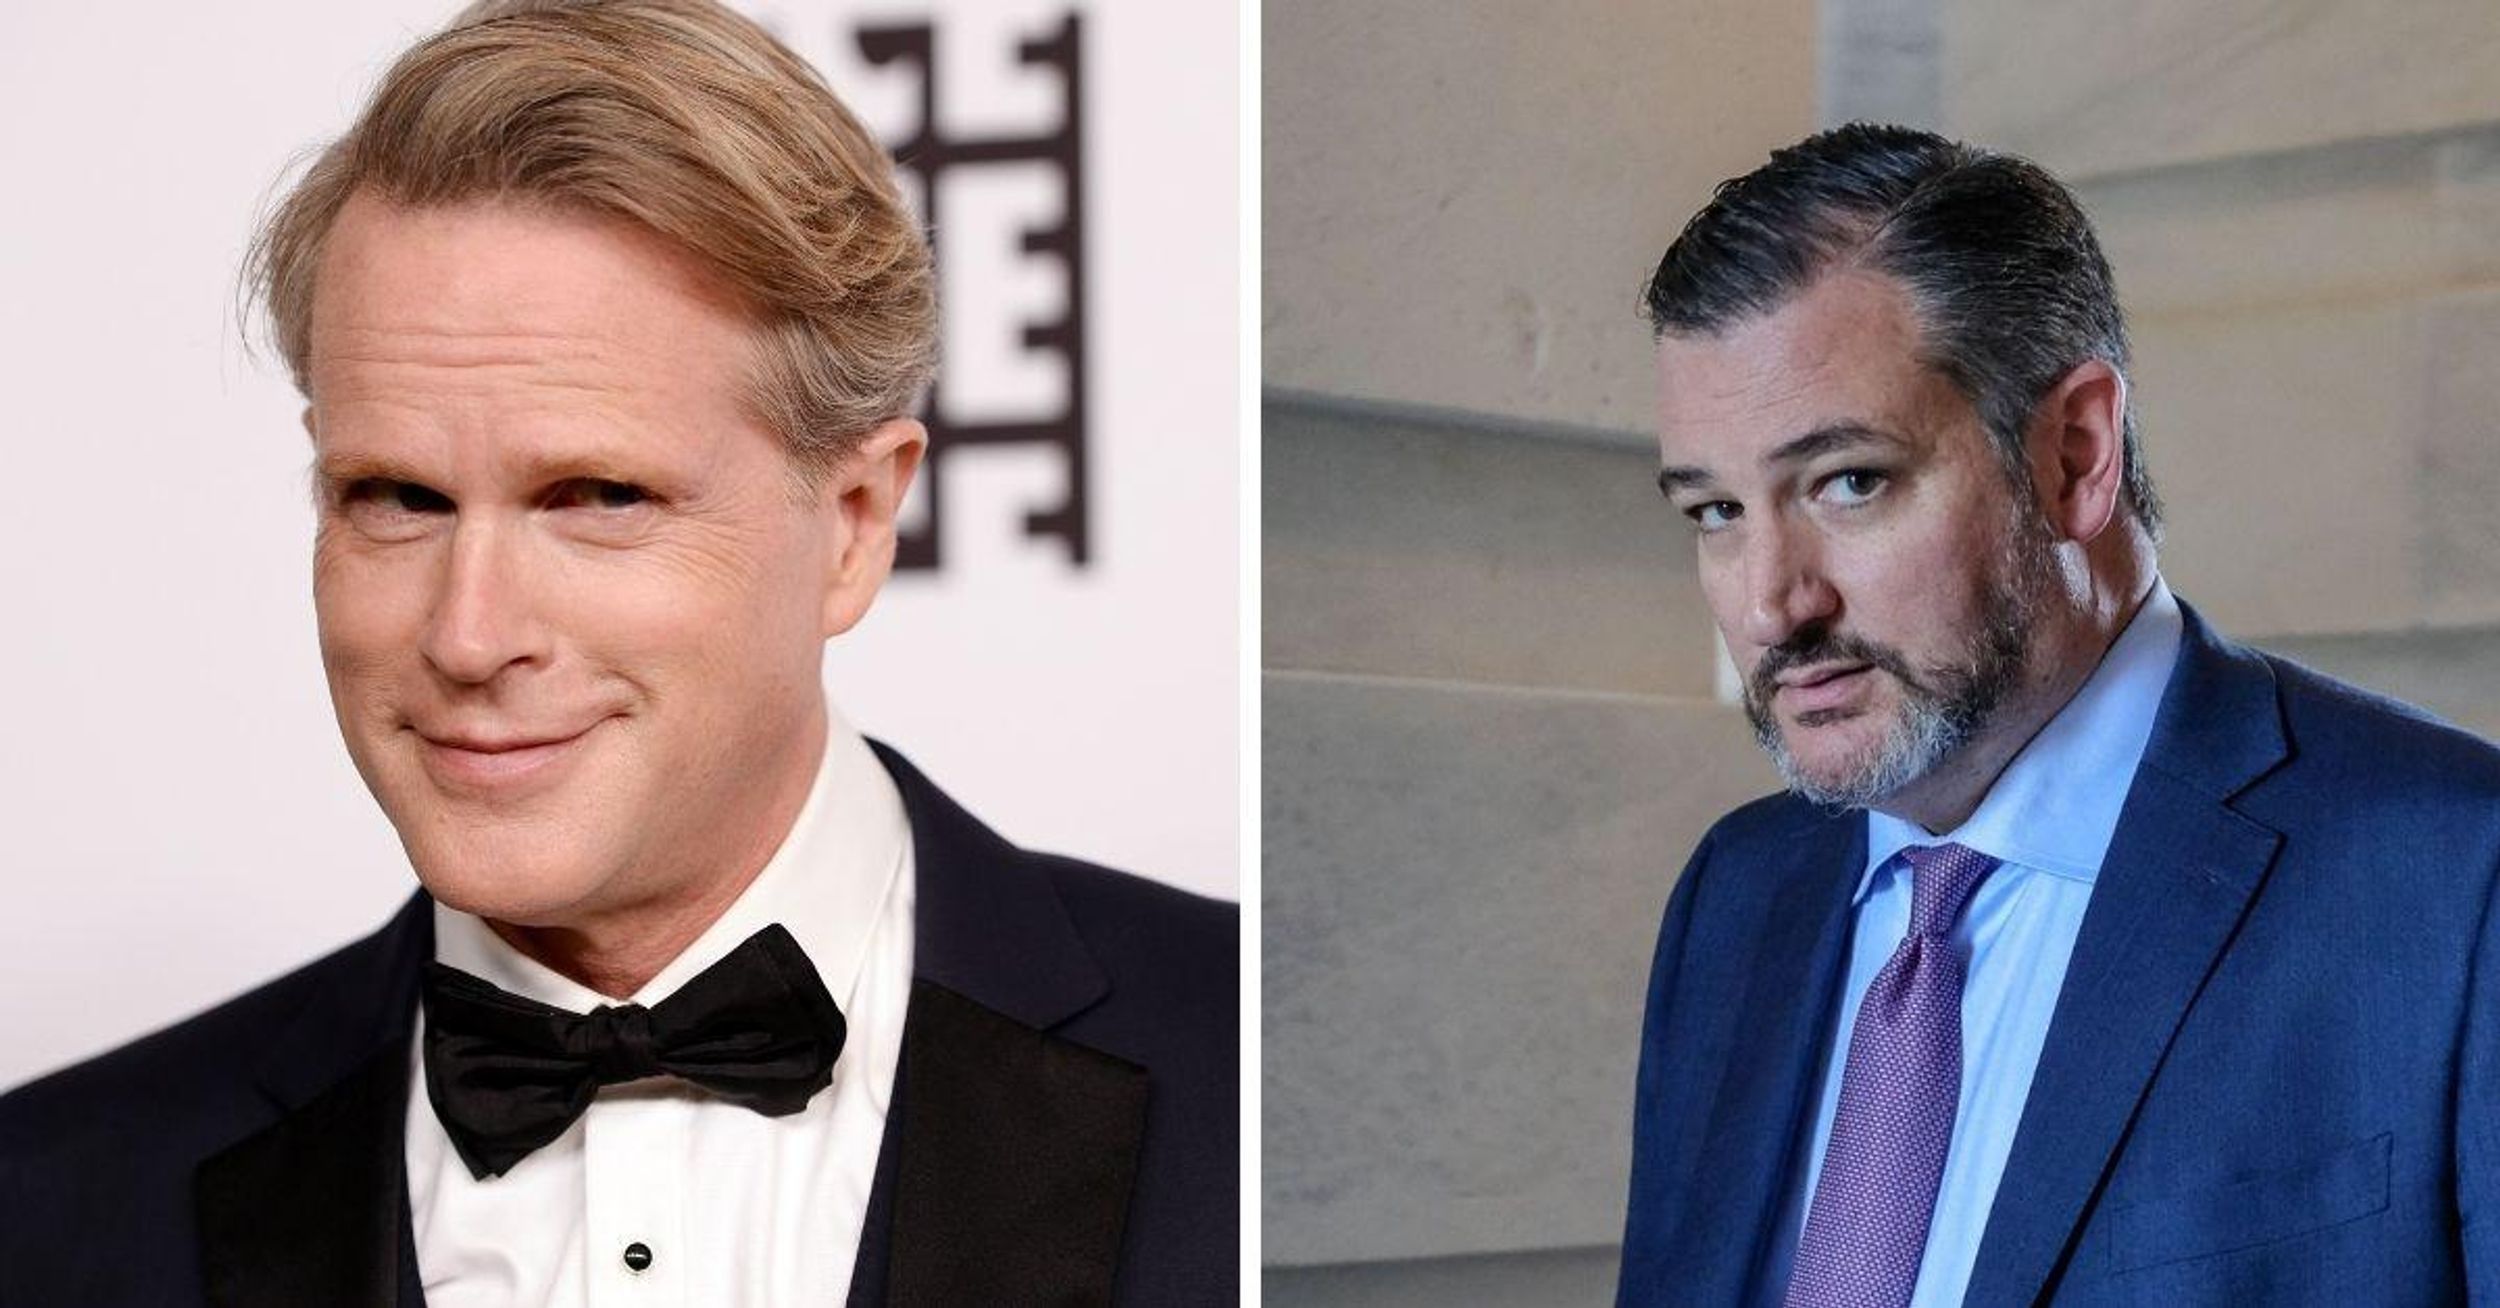 'Princess Bride' Superfan Ted Cruz Is Feuding With Cary Elwes—And Things Escalated Quickly